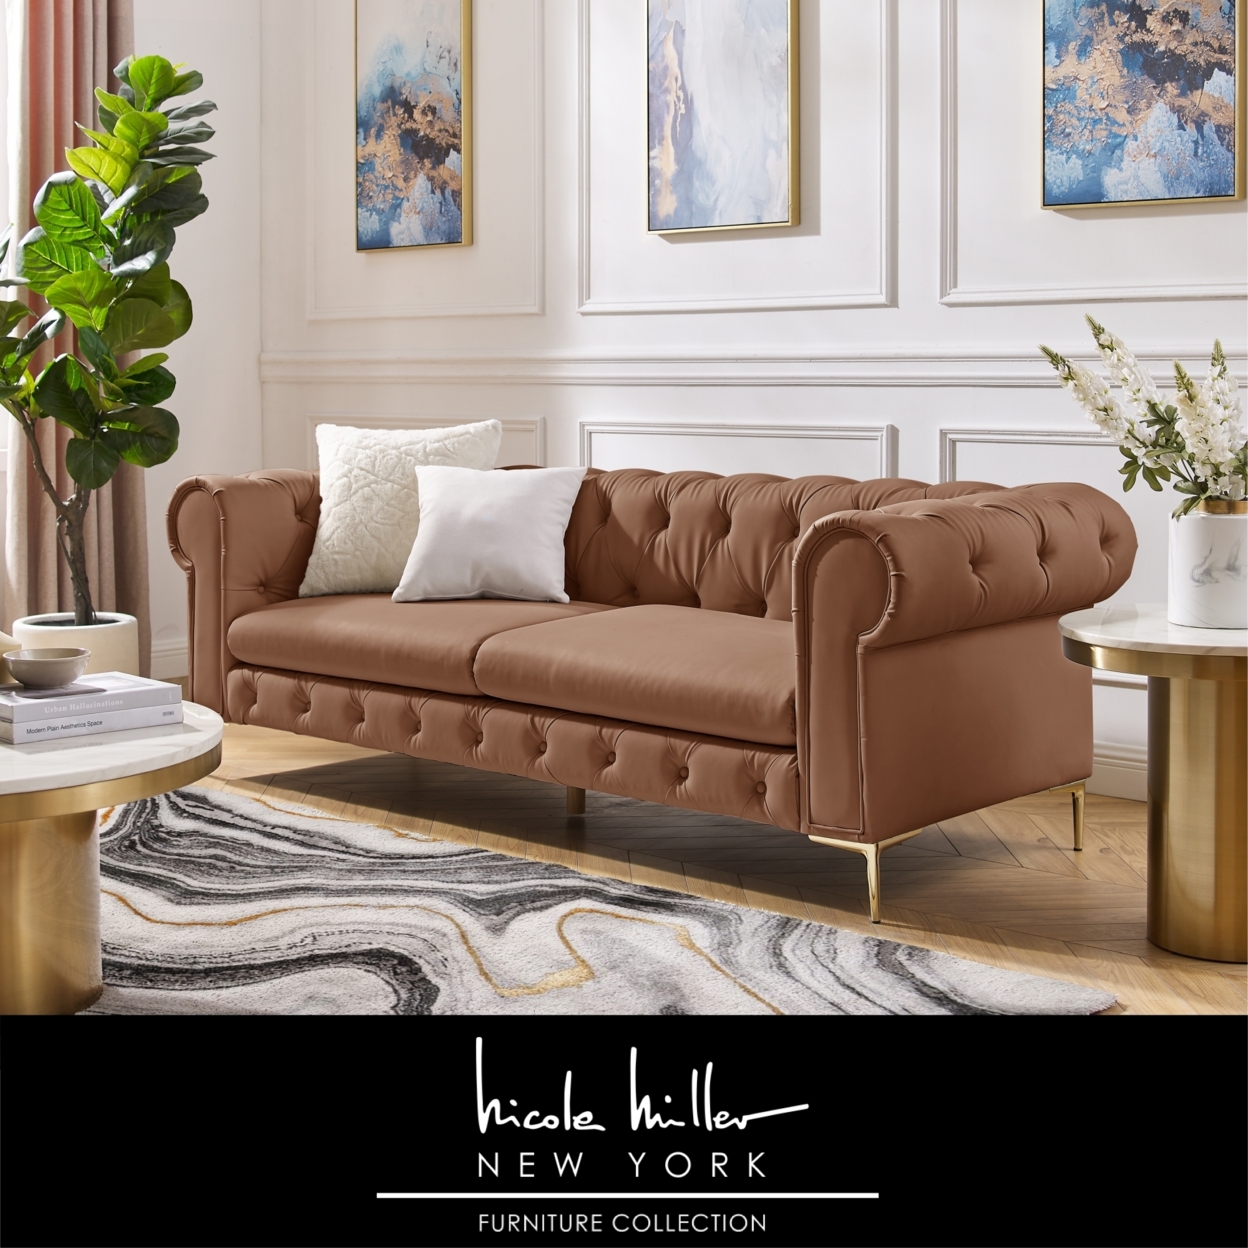 Laci Sofa - Button Tufted, 3 Seat - Rolled Arms - Y Leg, Sinuous Springs - Black